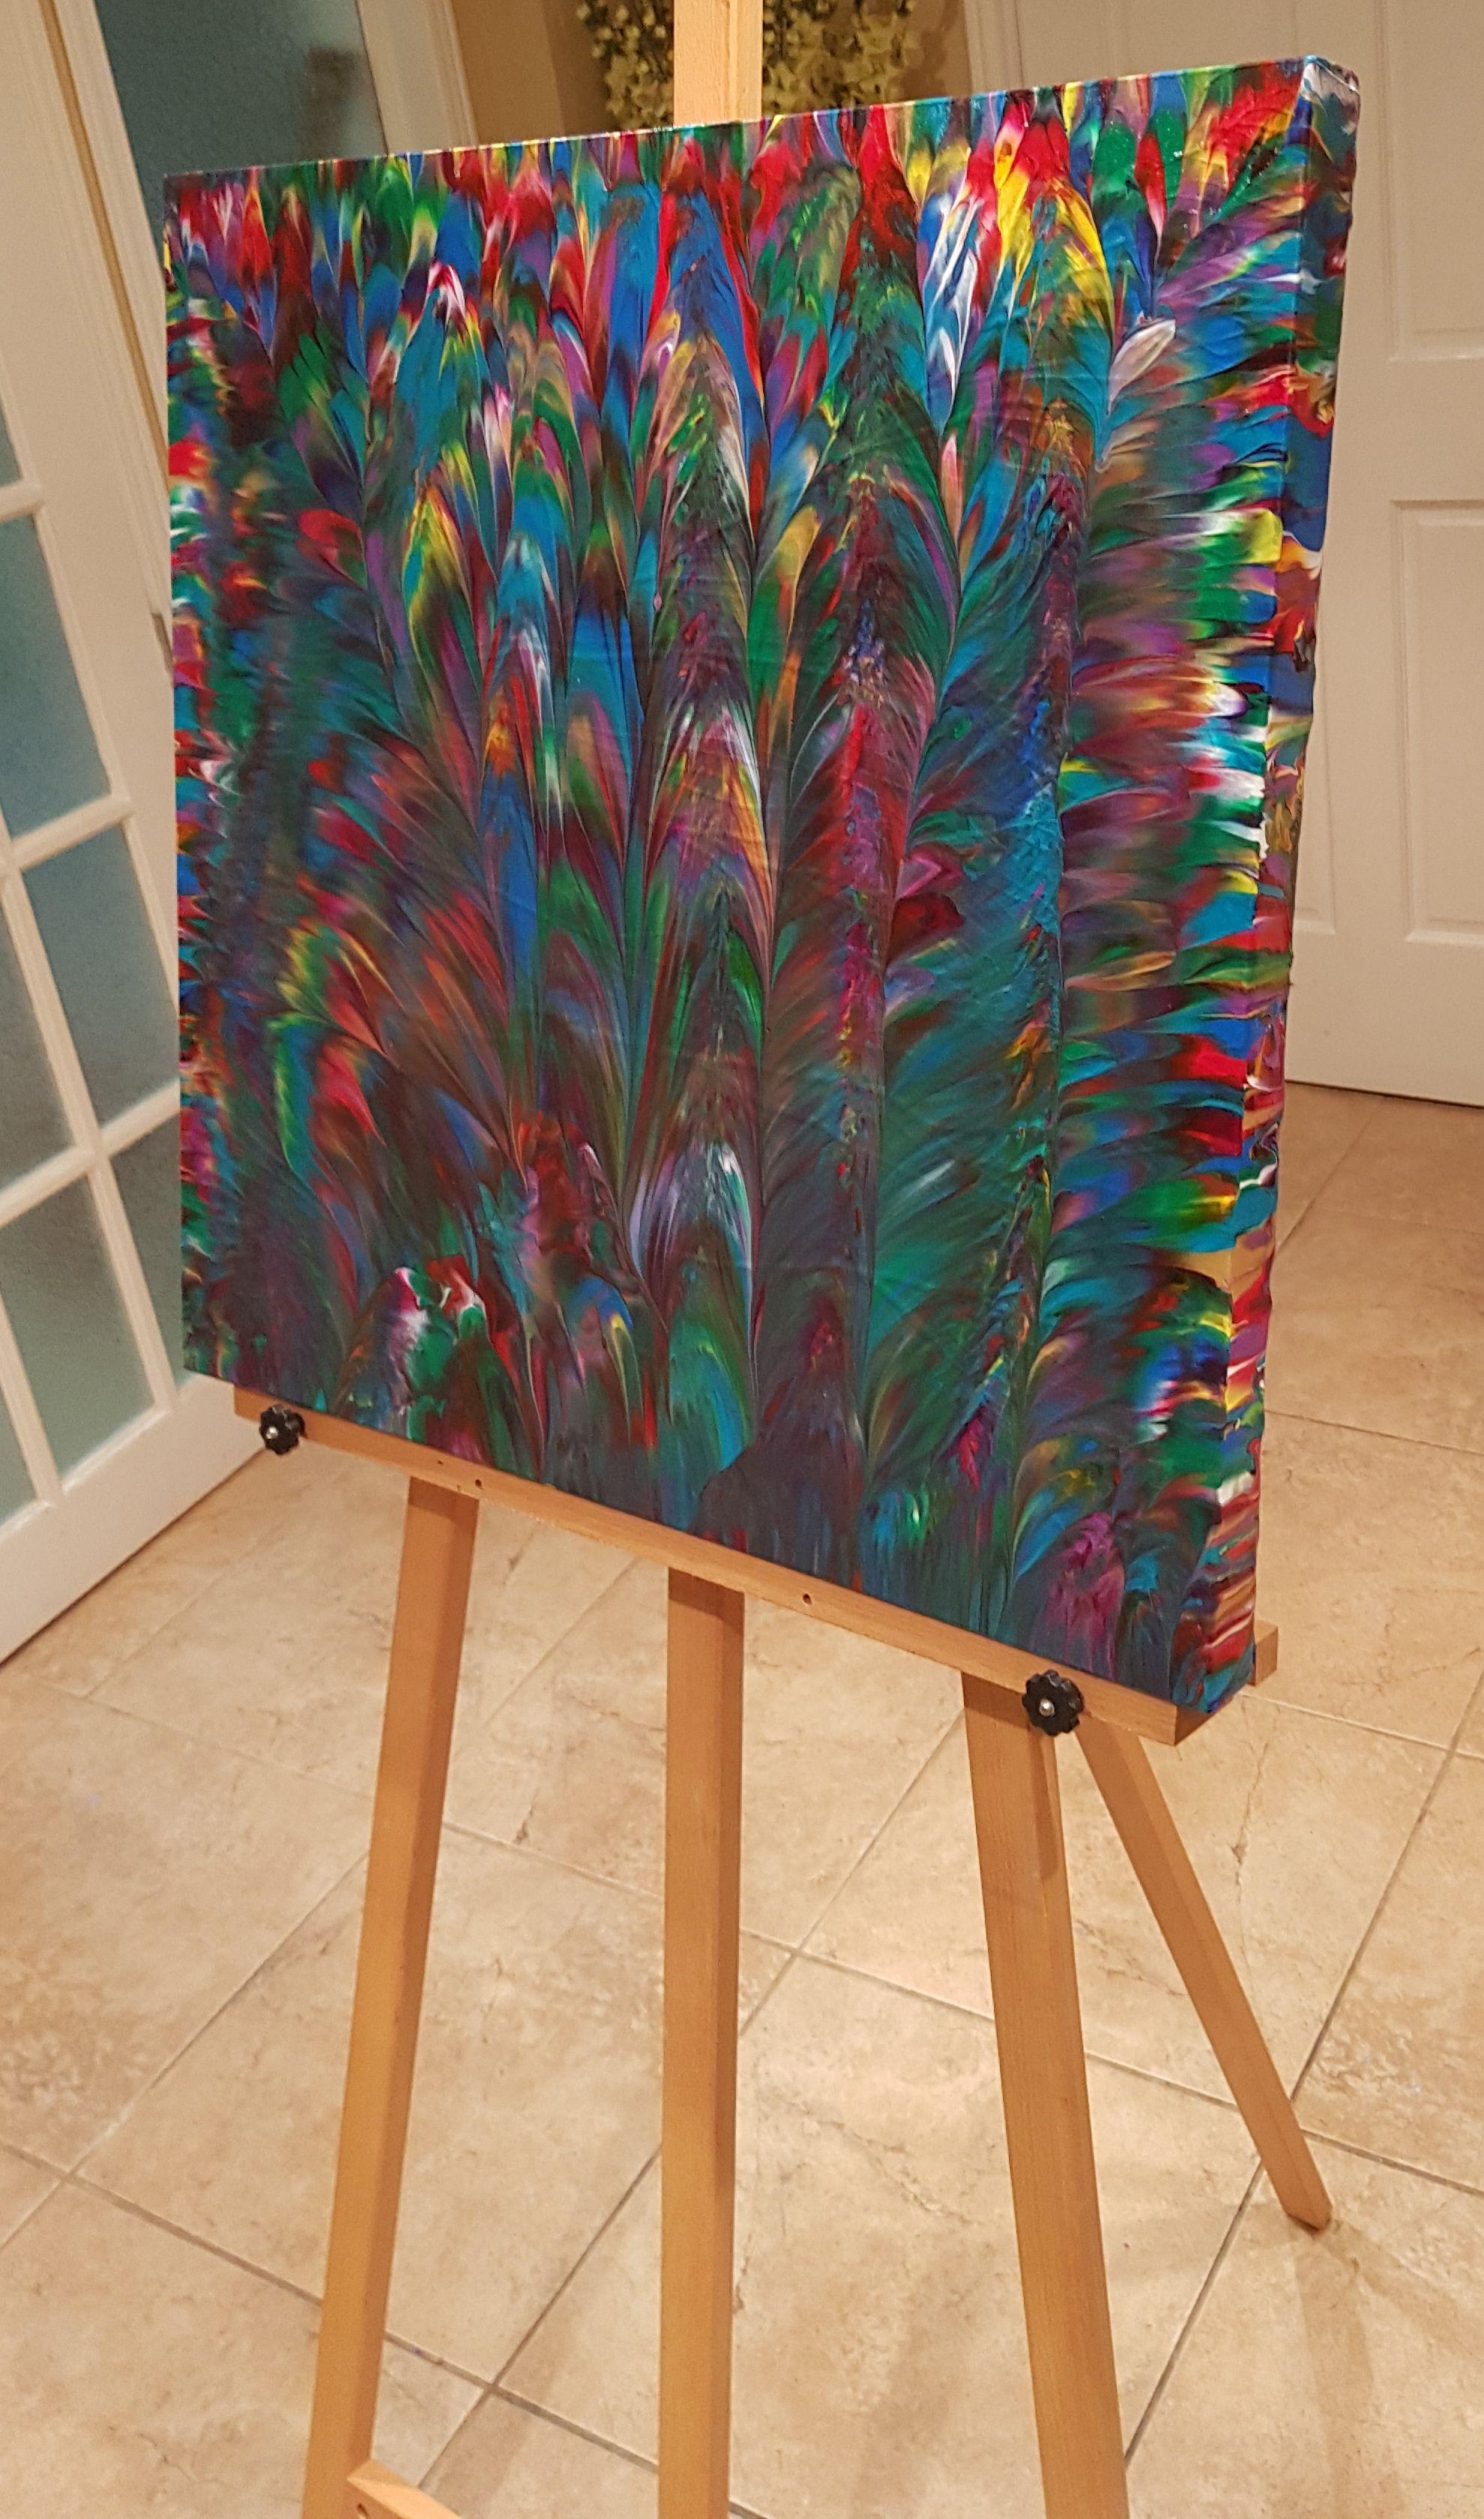 Tropical Paradise is an original abstract expressionism painting created with a dark emerald green hue with complimentary red, purple, and yellow accents that help add warmth. A beautiful cerulean blue hue adds freshness to a piece that was painted